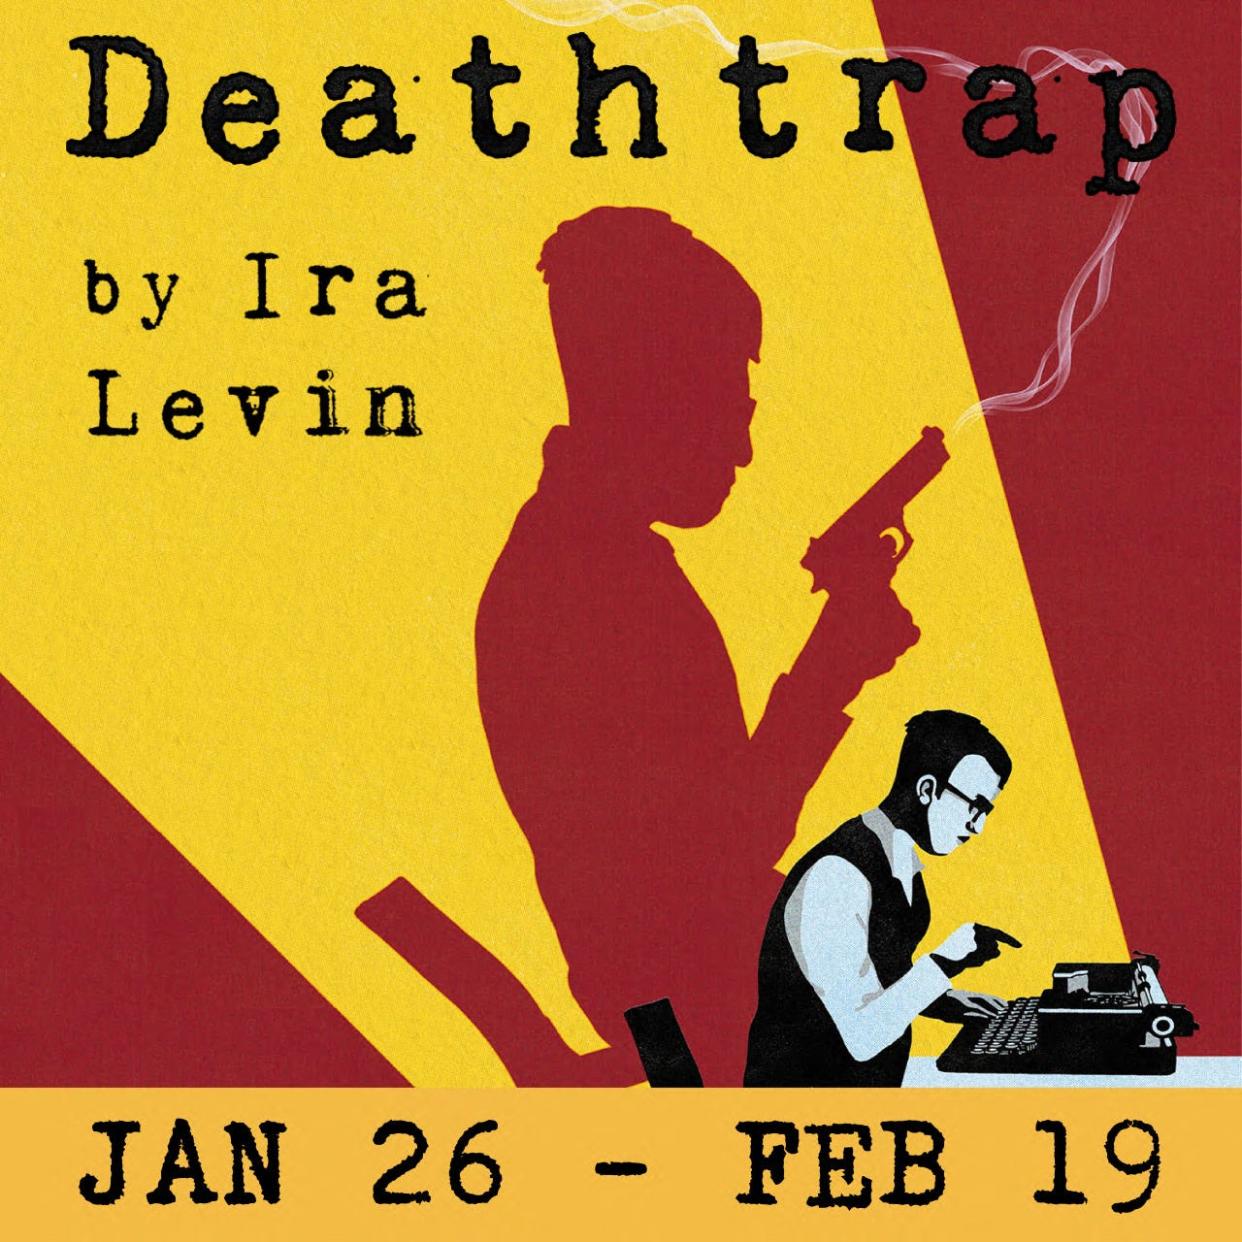 "Deathtrap" by Ira Levin will take the stage Jan. 26-Feb. 19 at Ted Jones Playhouse in Bloomington.